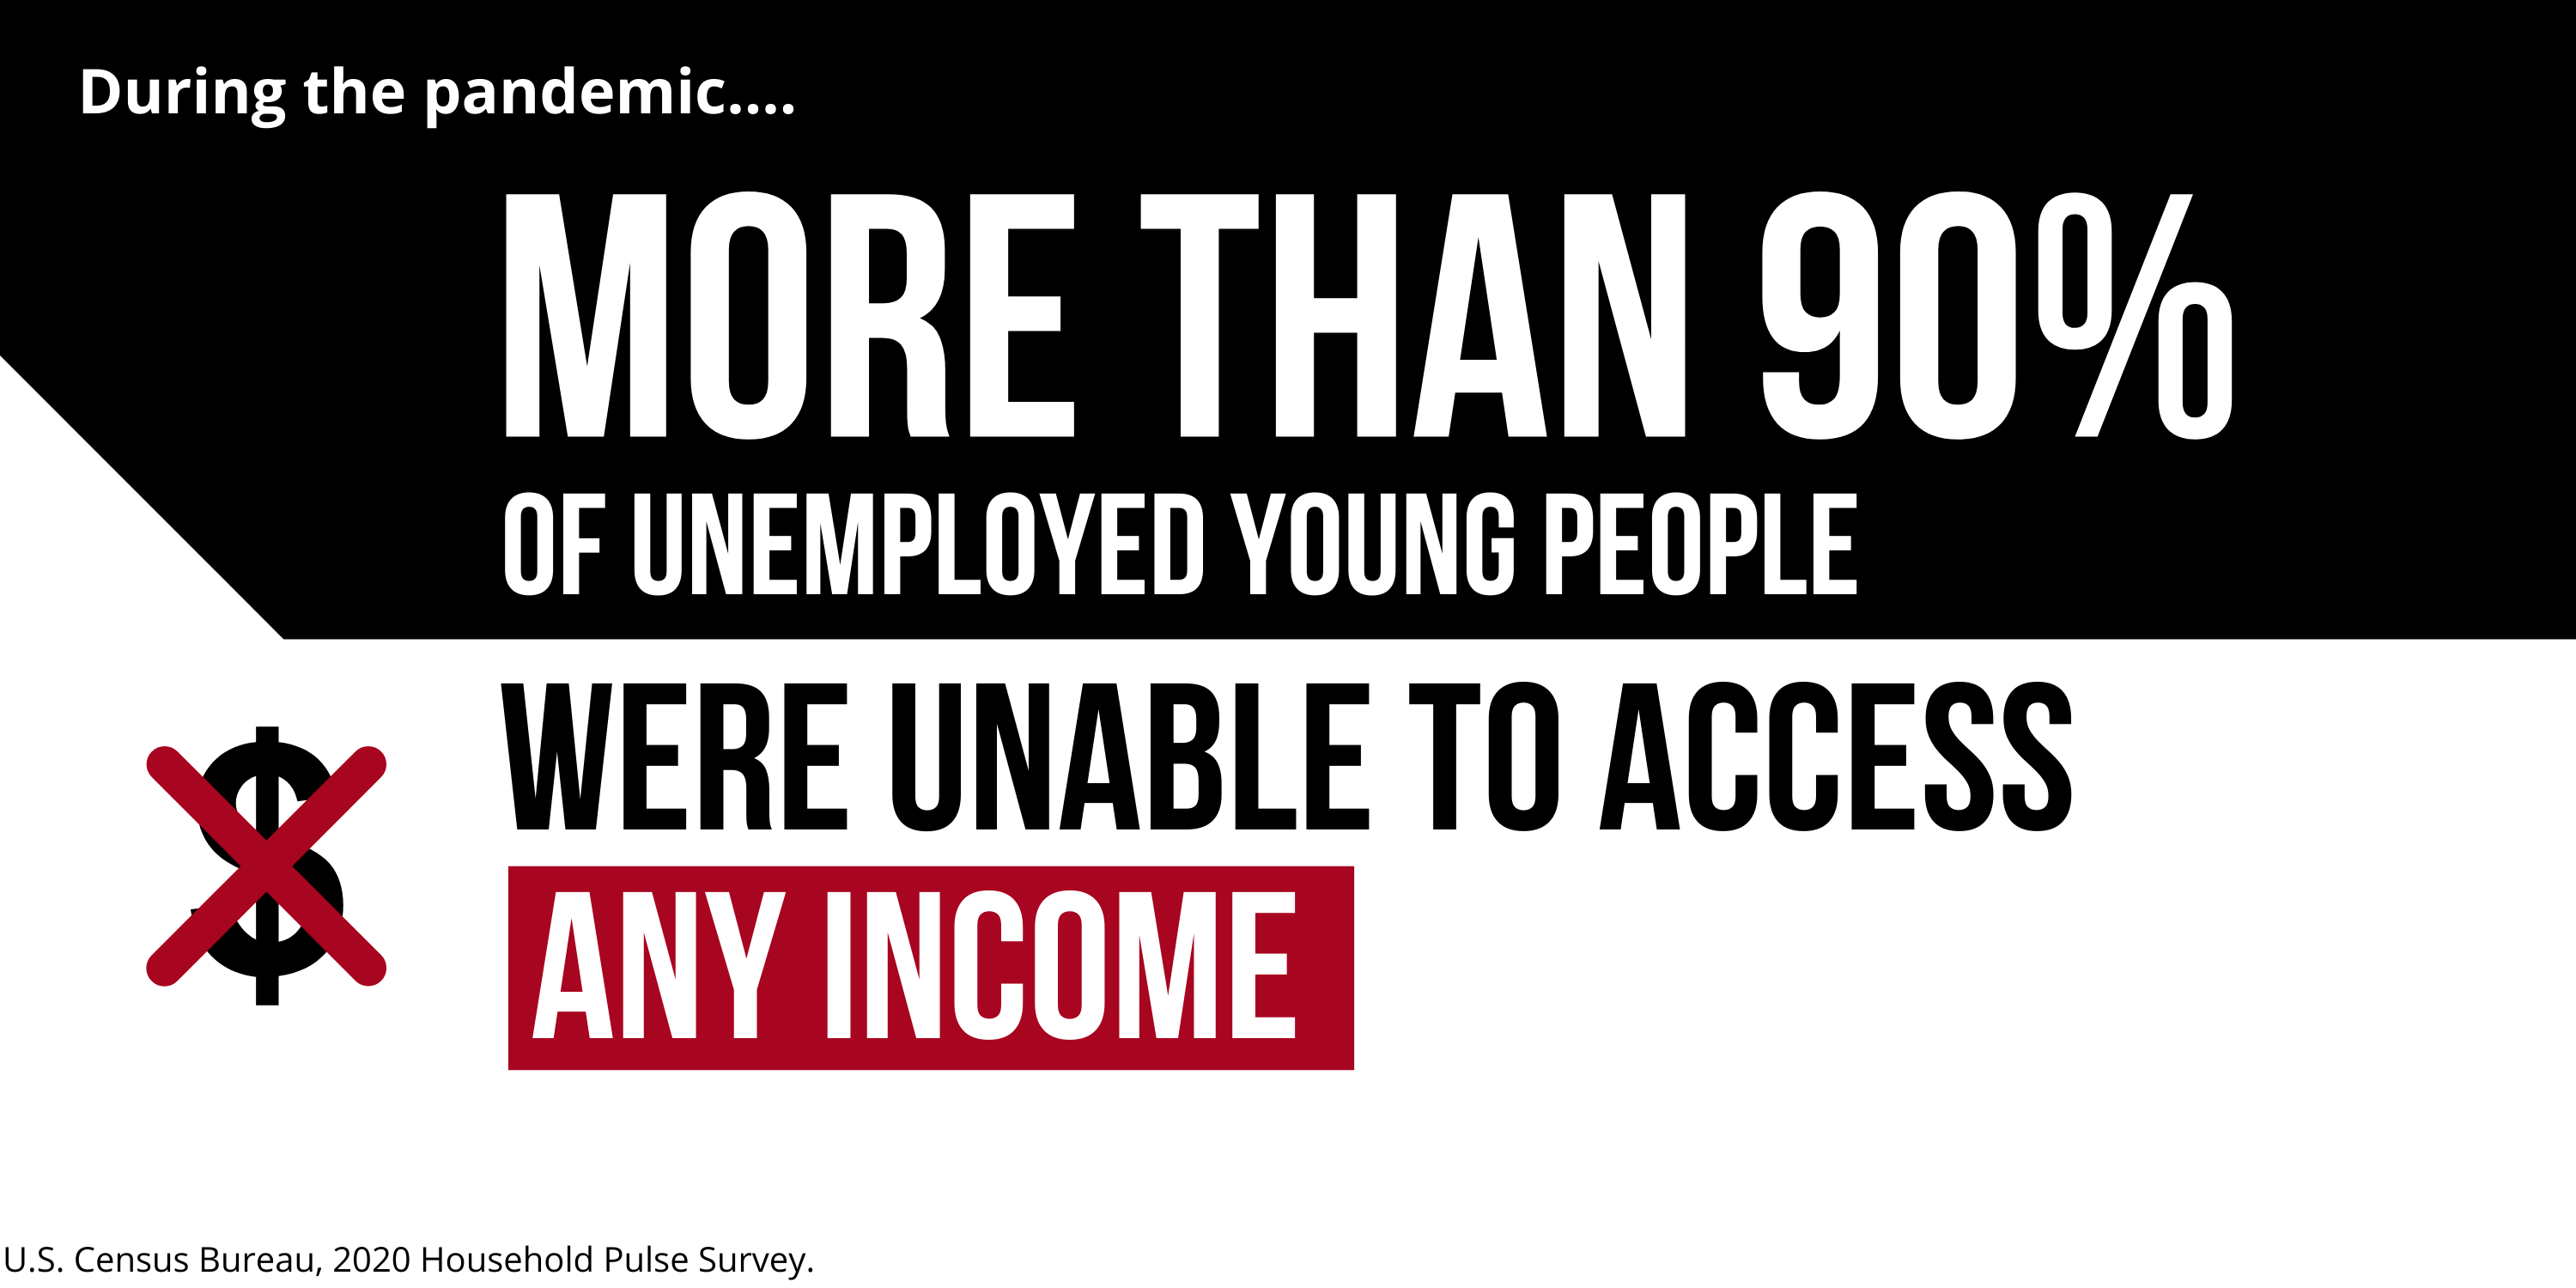 More than 90% of unemployed young people were unable to access any income during the pandemic.